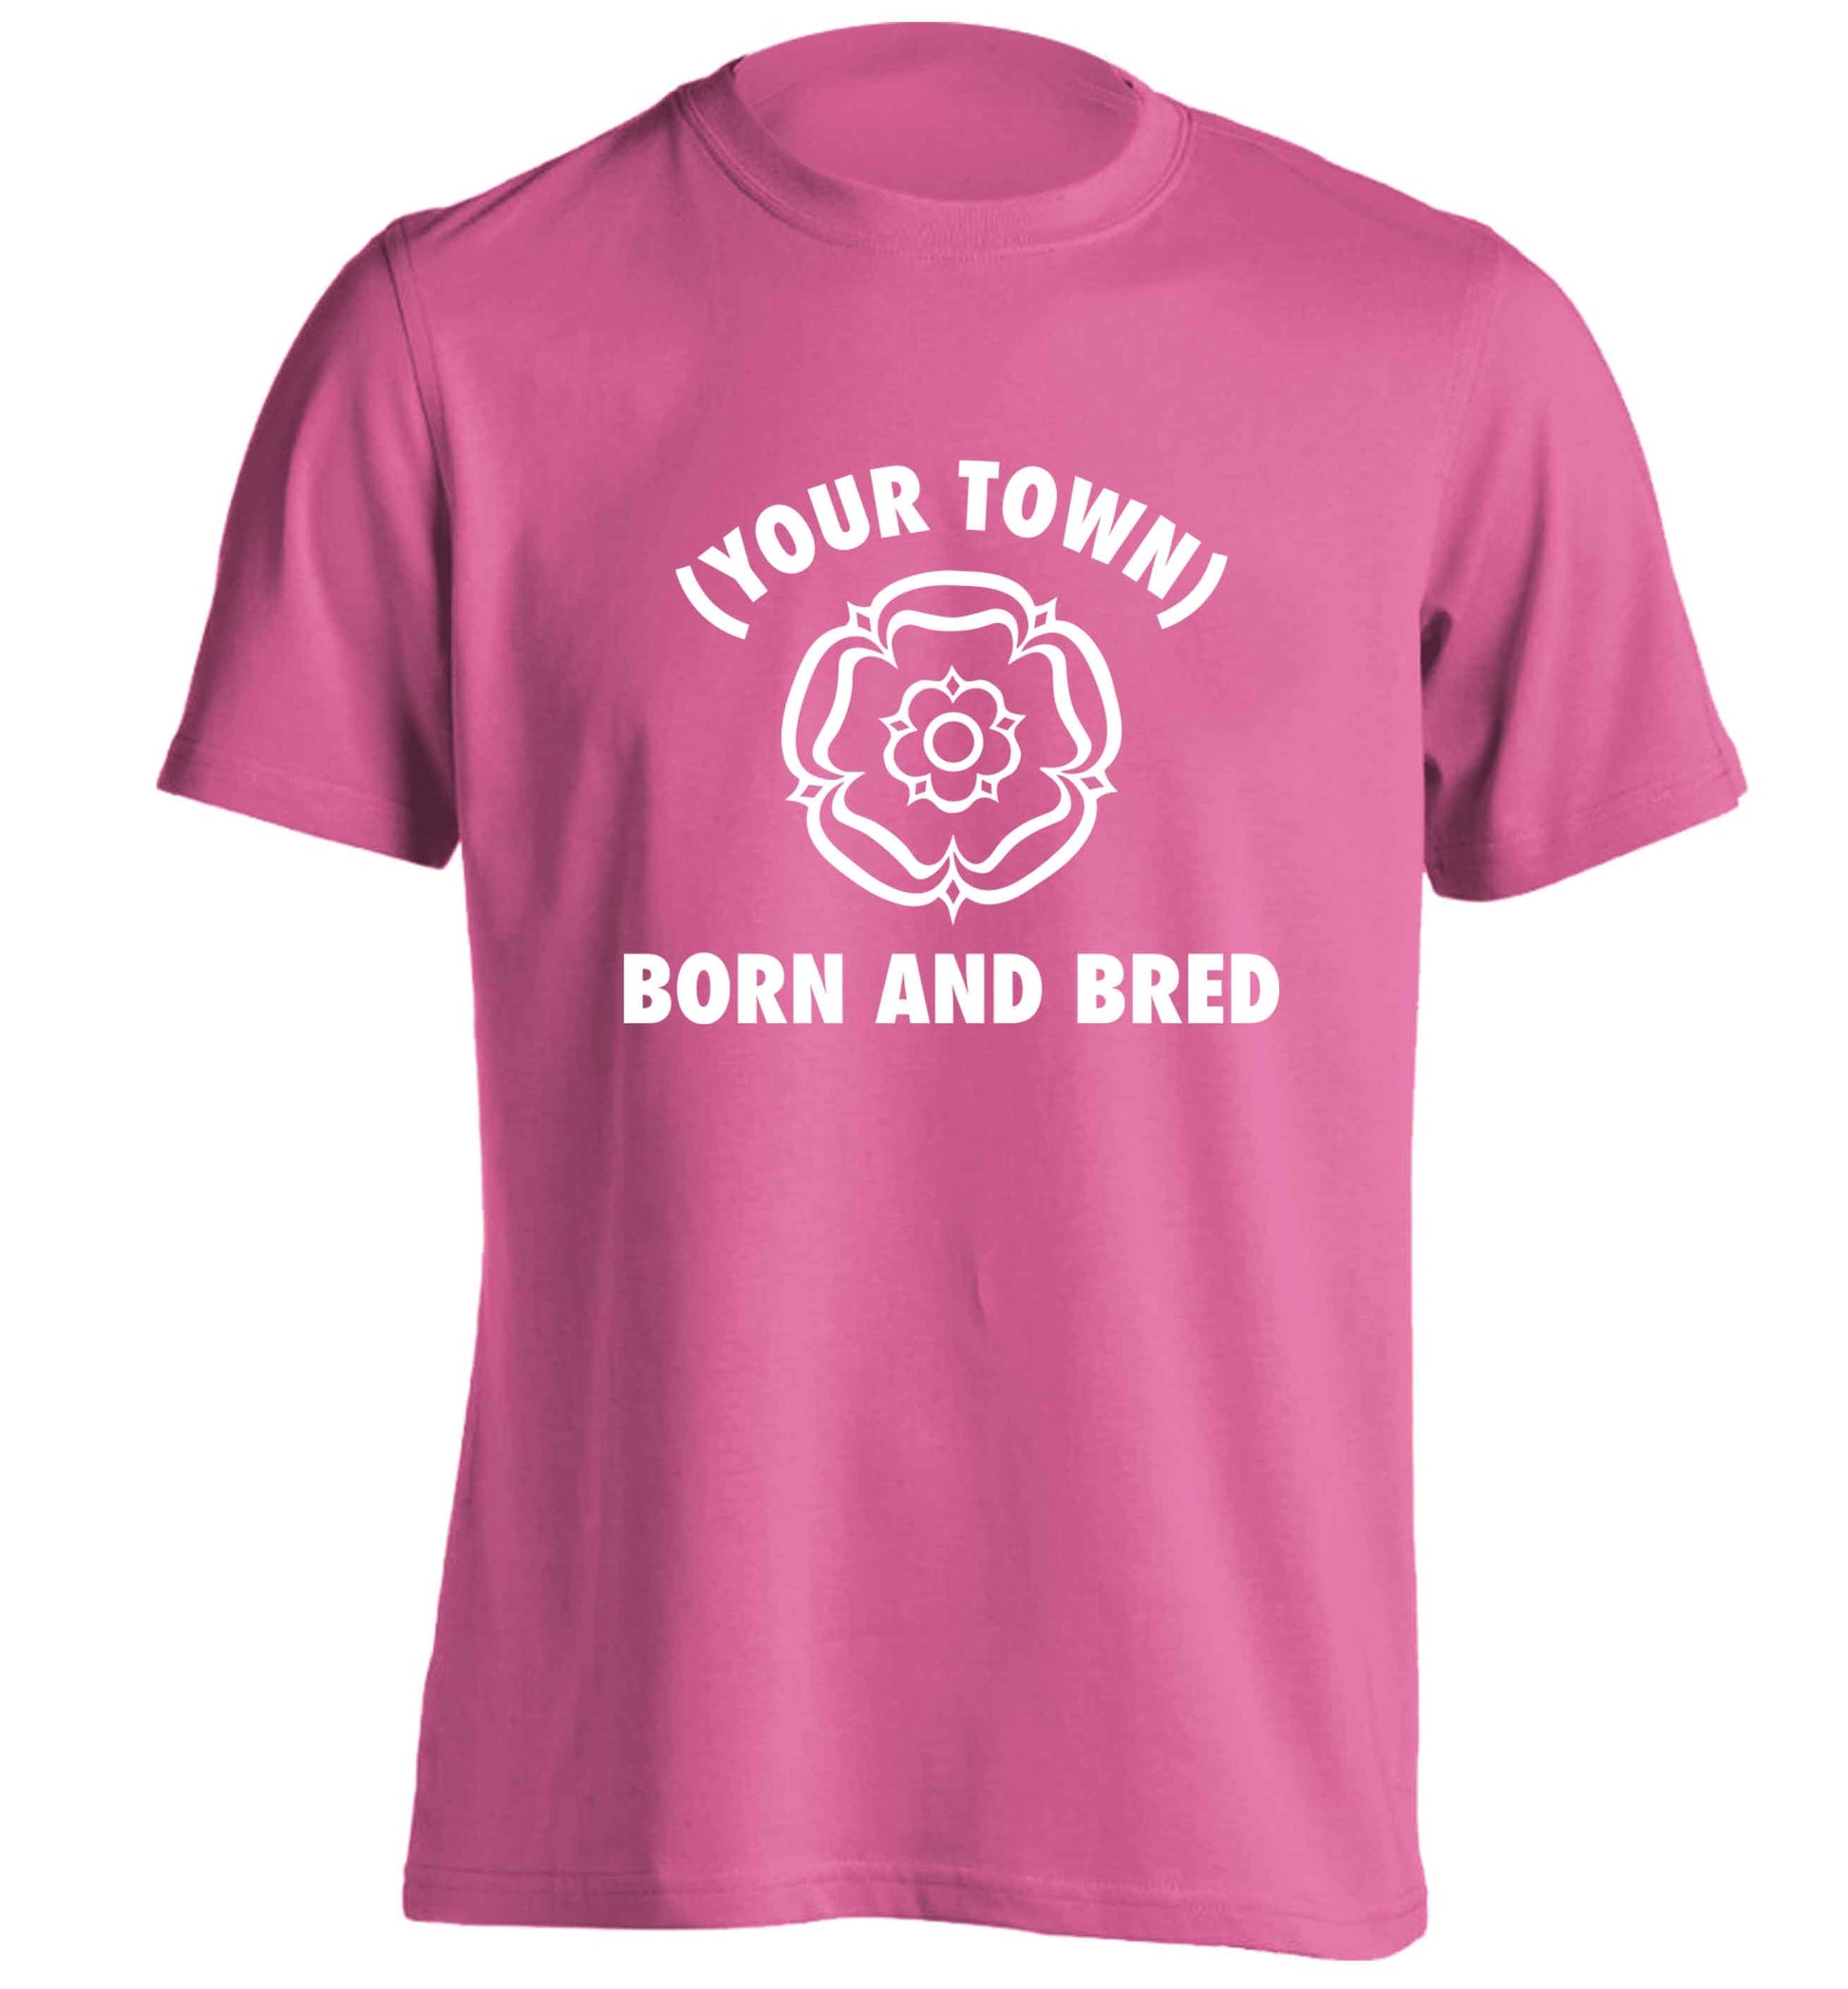 Personalised born and bred adults unisex pink Tshirt 2XL